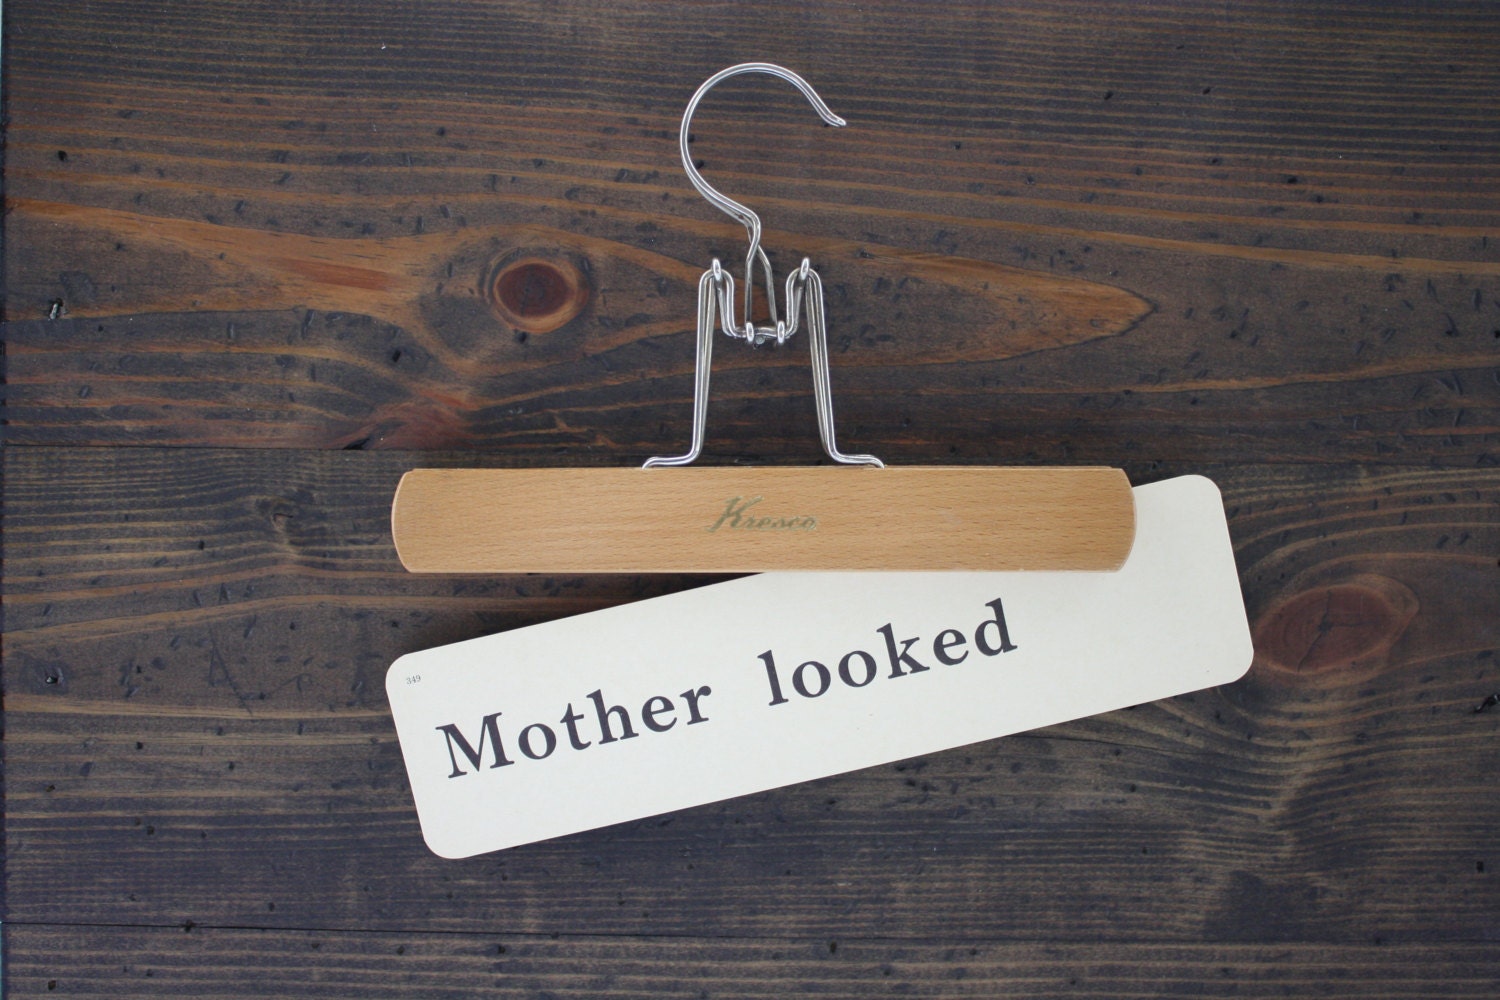 Vintage Flash Card Mother Looked Dick And Jane By Ethelusvintage